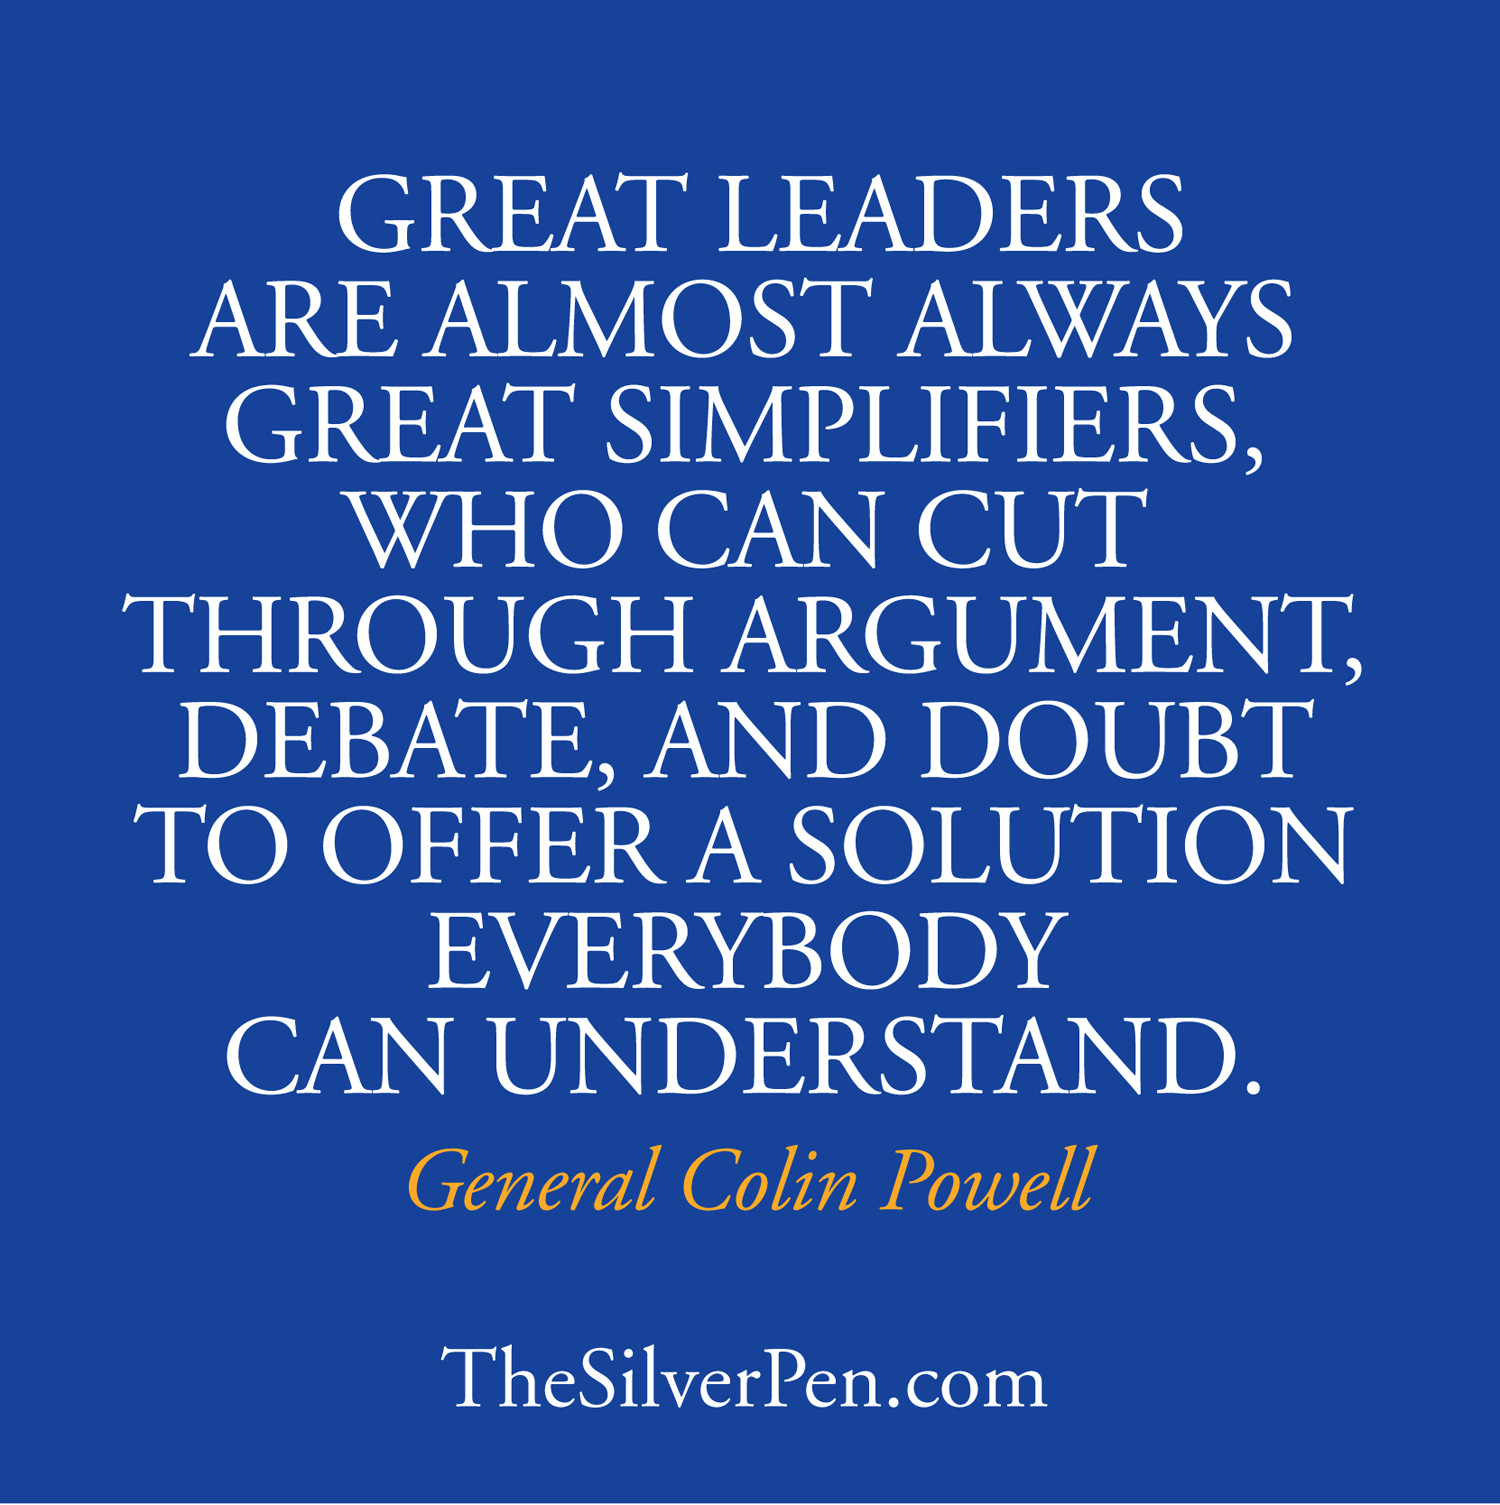 Colin Powell Quote Leadership
 Great Leaders are Great Simplifiers TheSilverPen